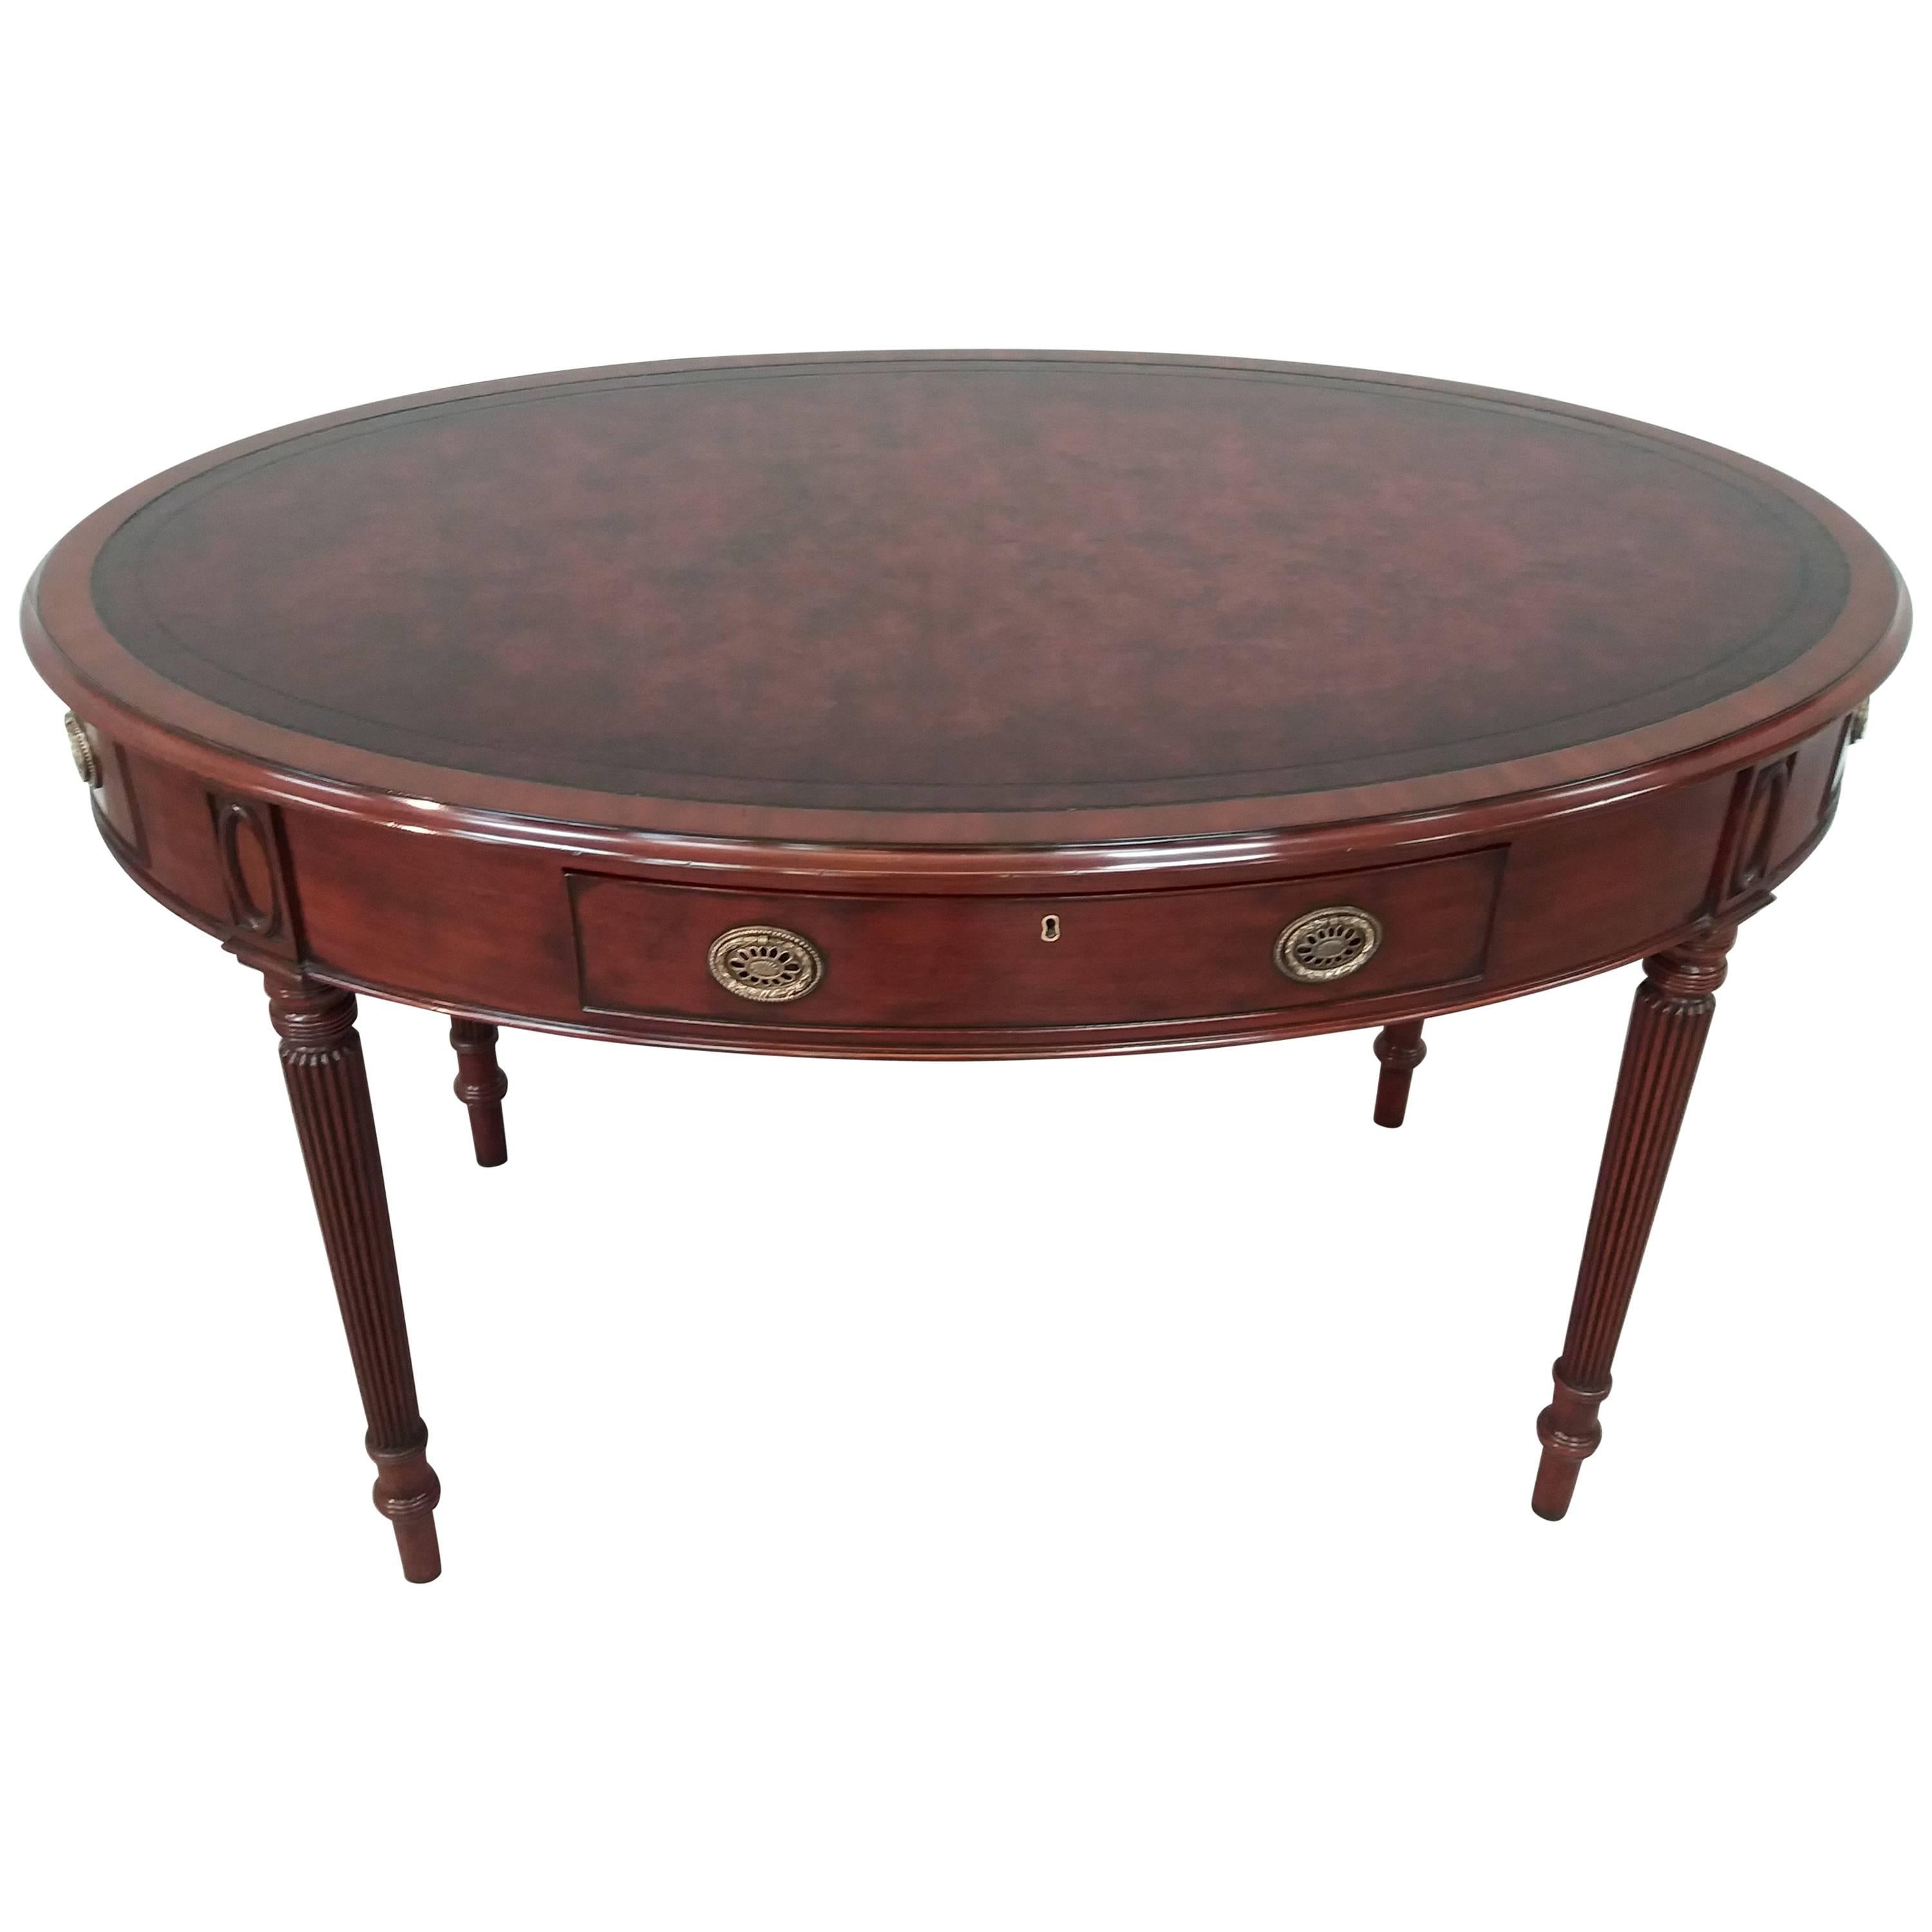 Arthur Brett Regency-style Mahogany Oval Writing Table with Leather Top For Sale